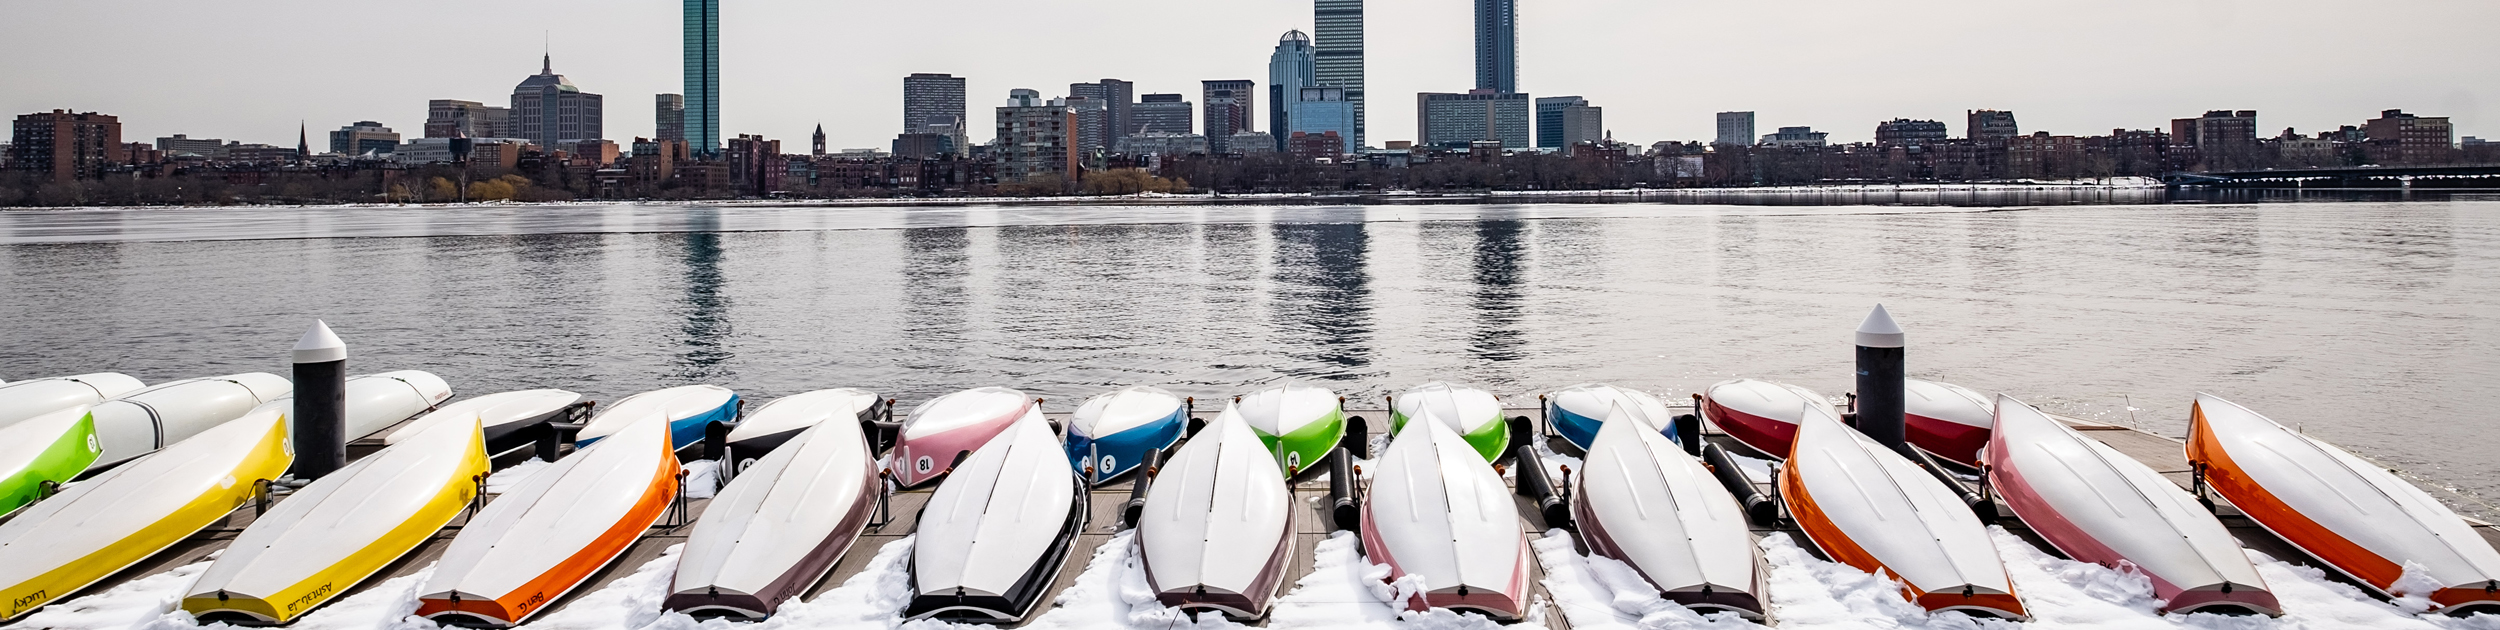 image of a group of snowy boats parked on Boston Harbor